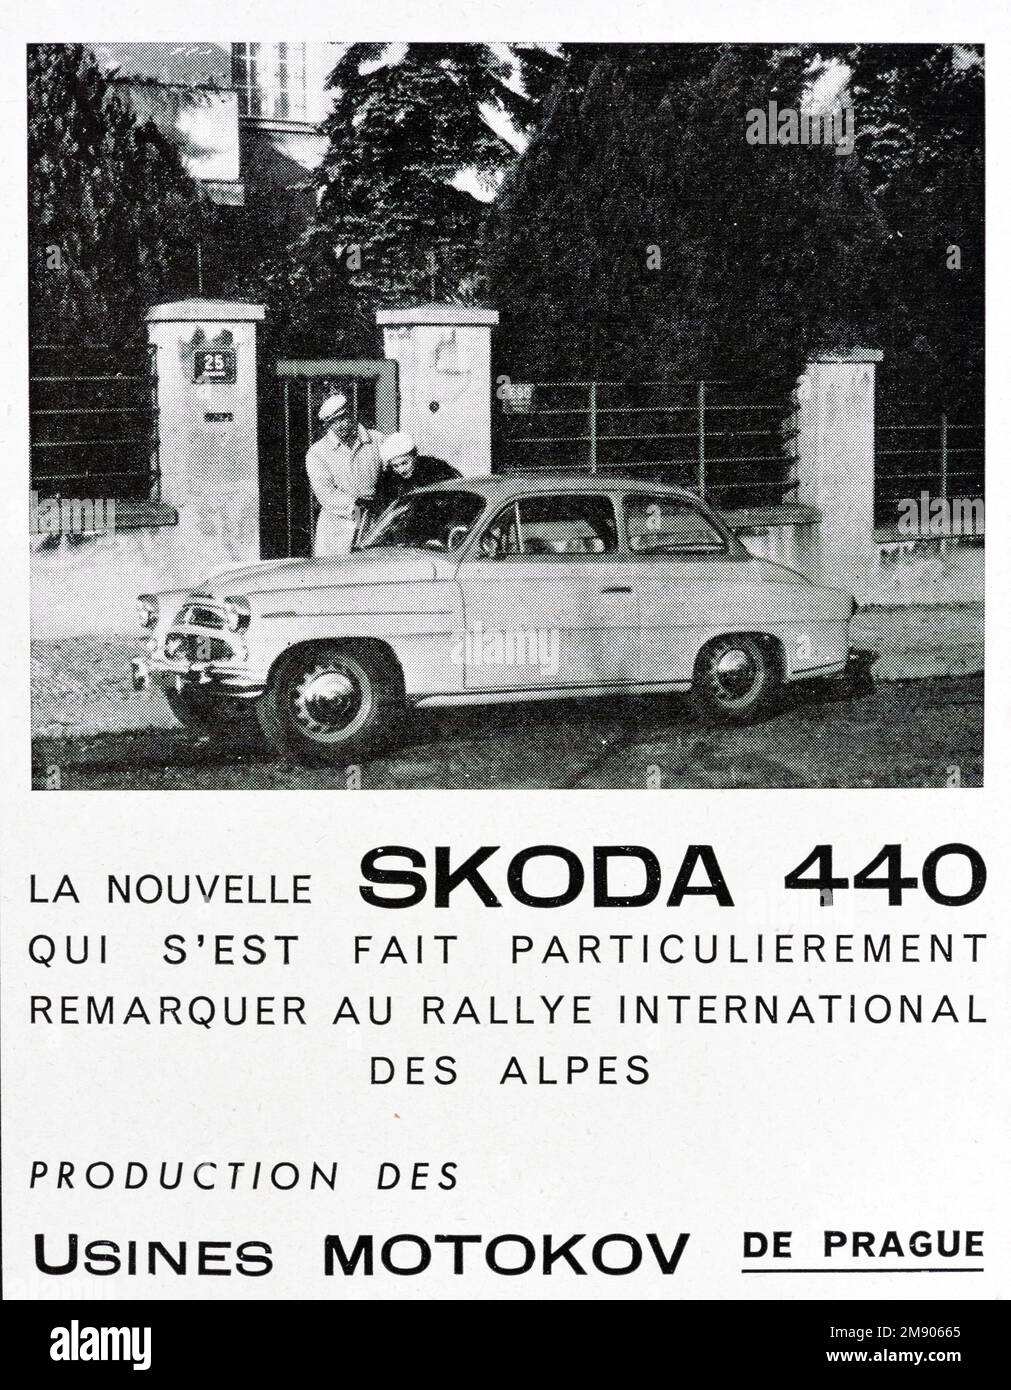 Vintage or Old Advert, Advertisement, Publicity or Illustration for Skoda 440 Saloon Advert 1956. The Skoda 440, aka 440 Spartak, was manufactured by AZNP in Czechoslovakia between 1955 and 1959. Stock Photo